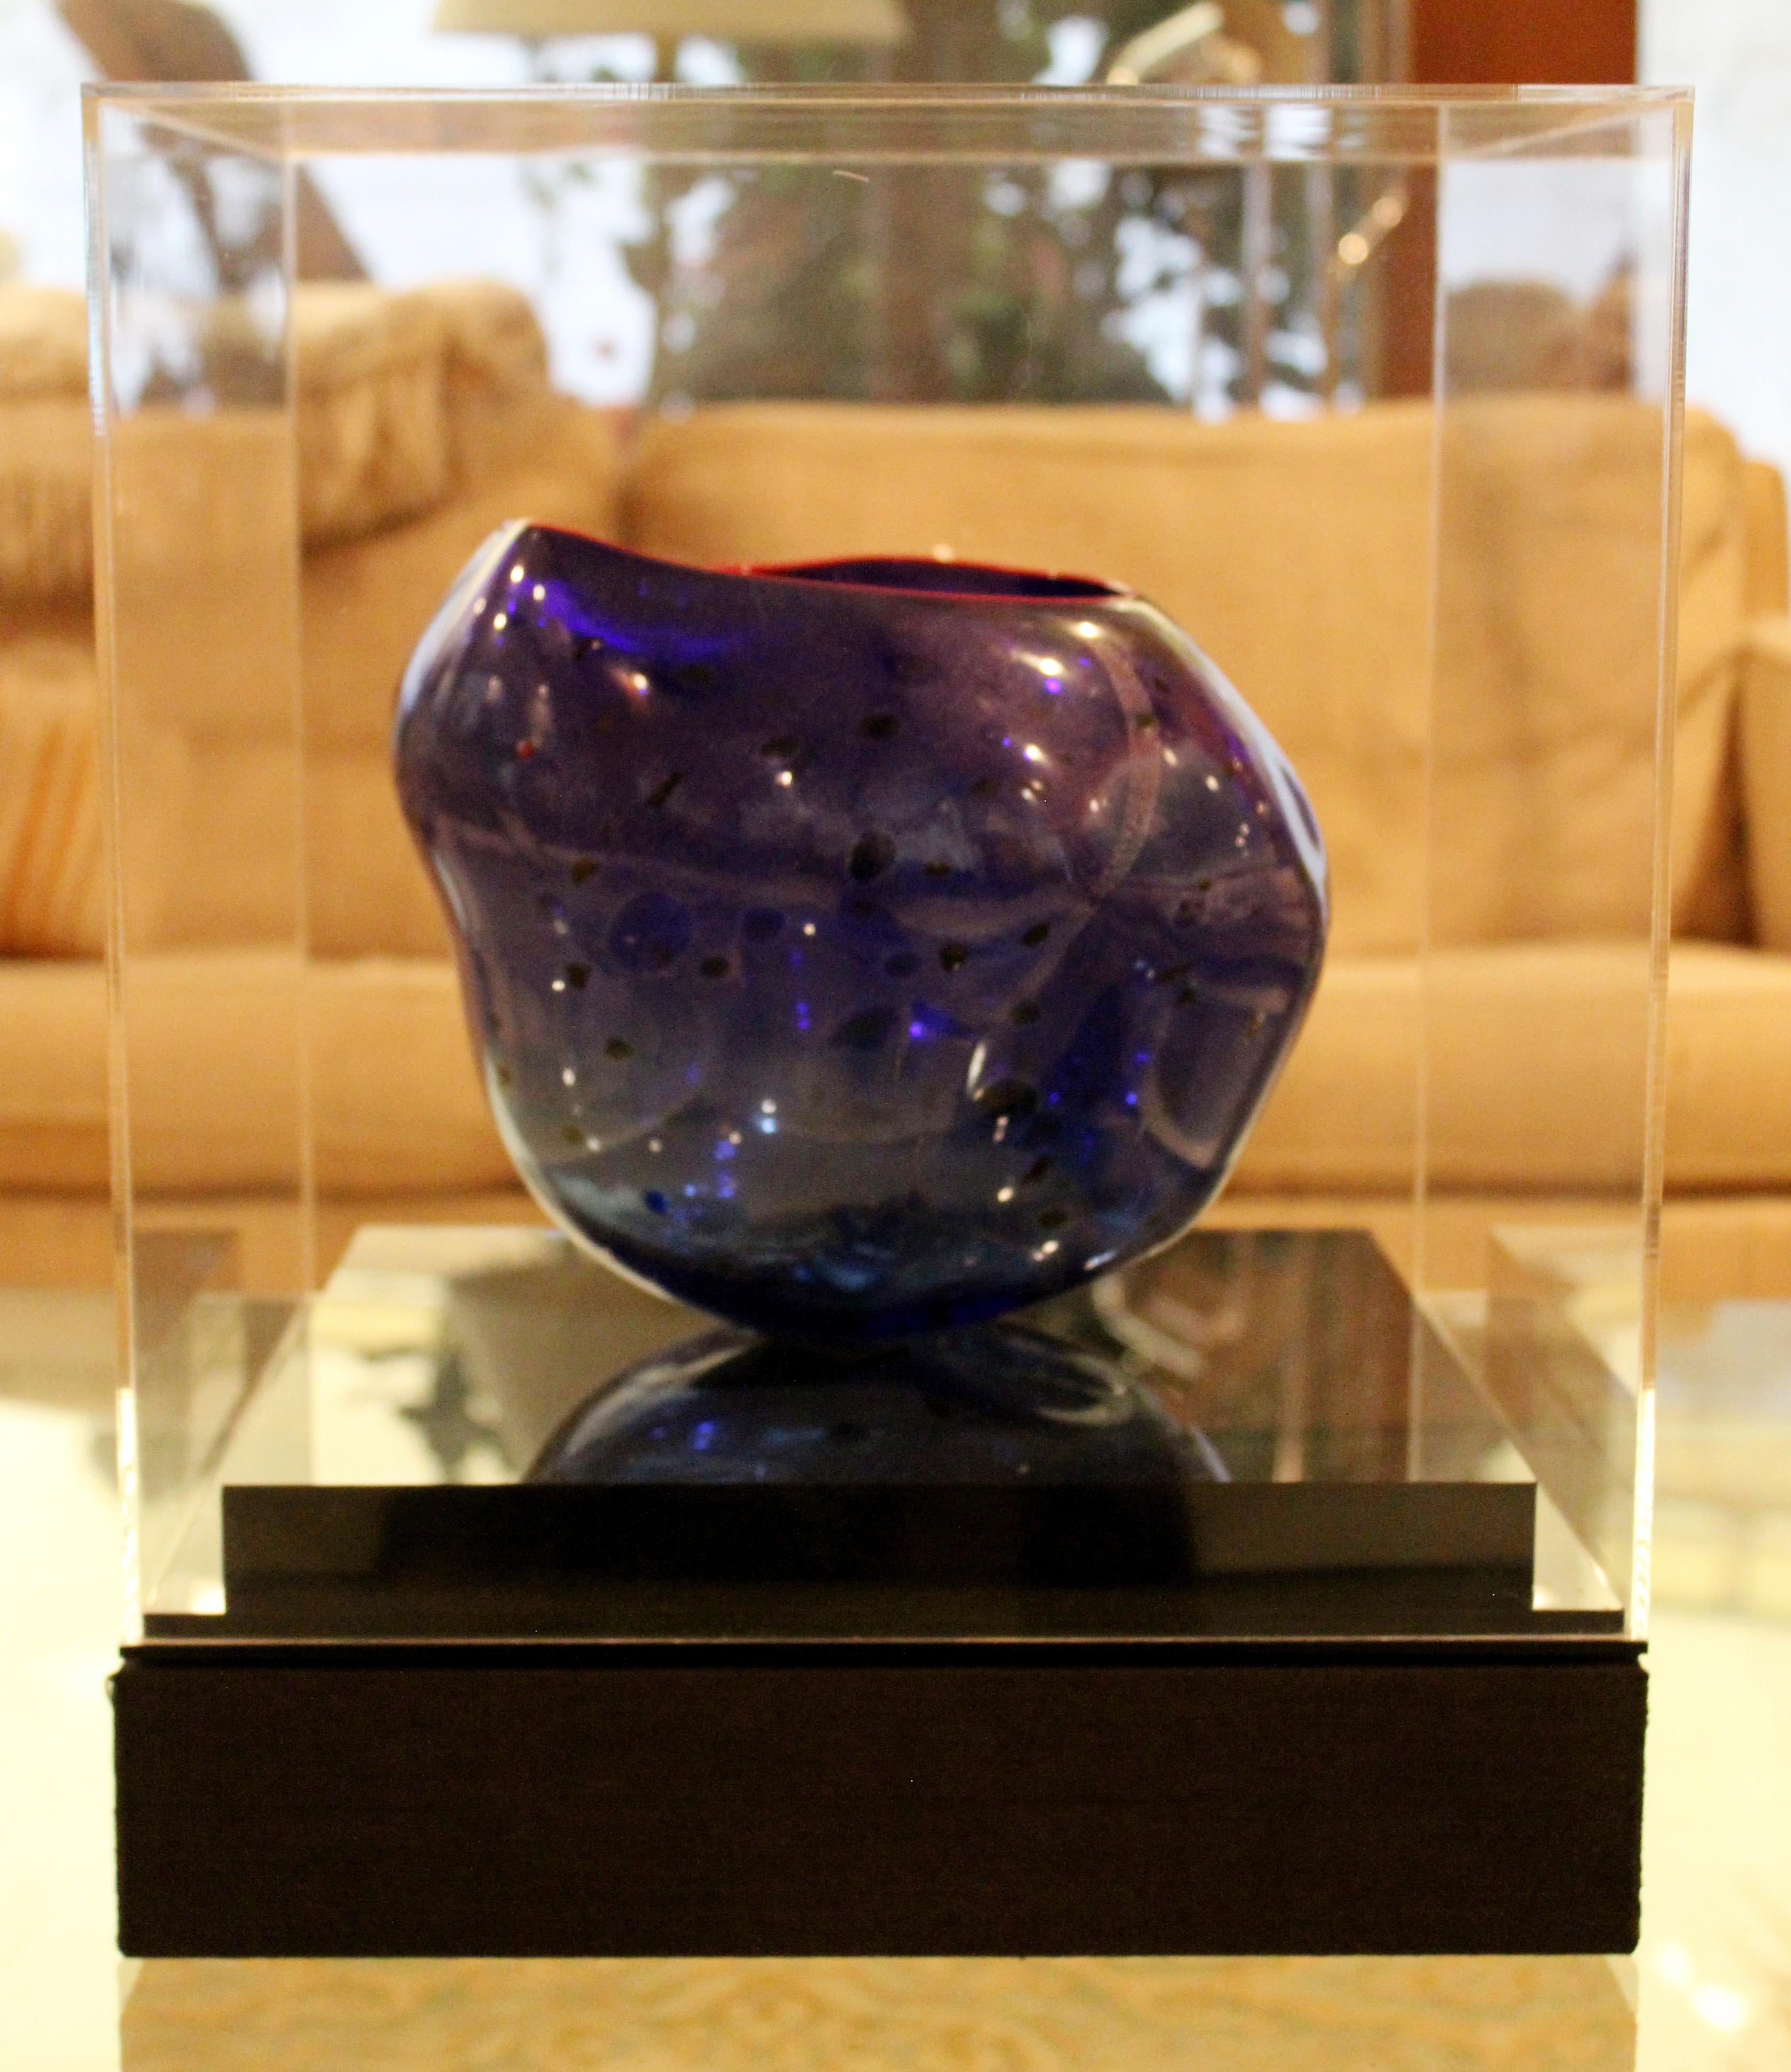 Late 20th Century Mid-Century Modern Shell Glass Art Table Sculpture Signed Chihuly 1990s Blue